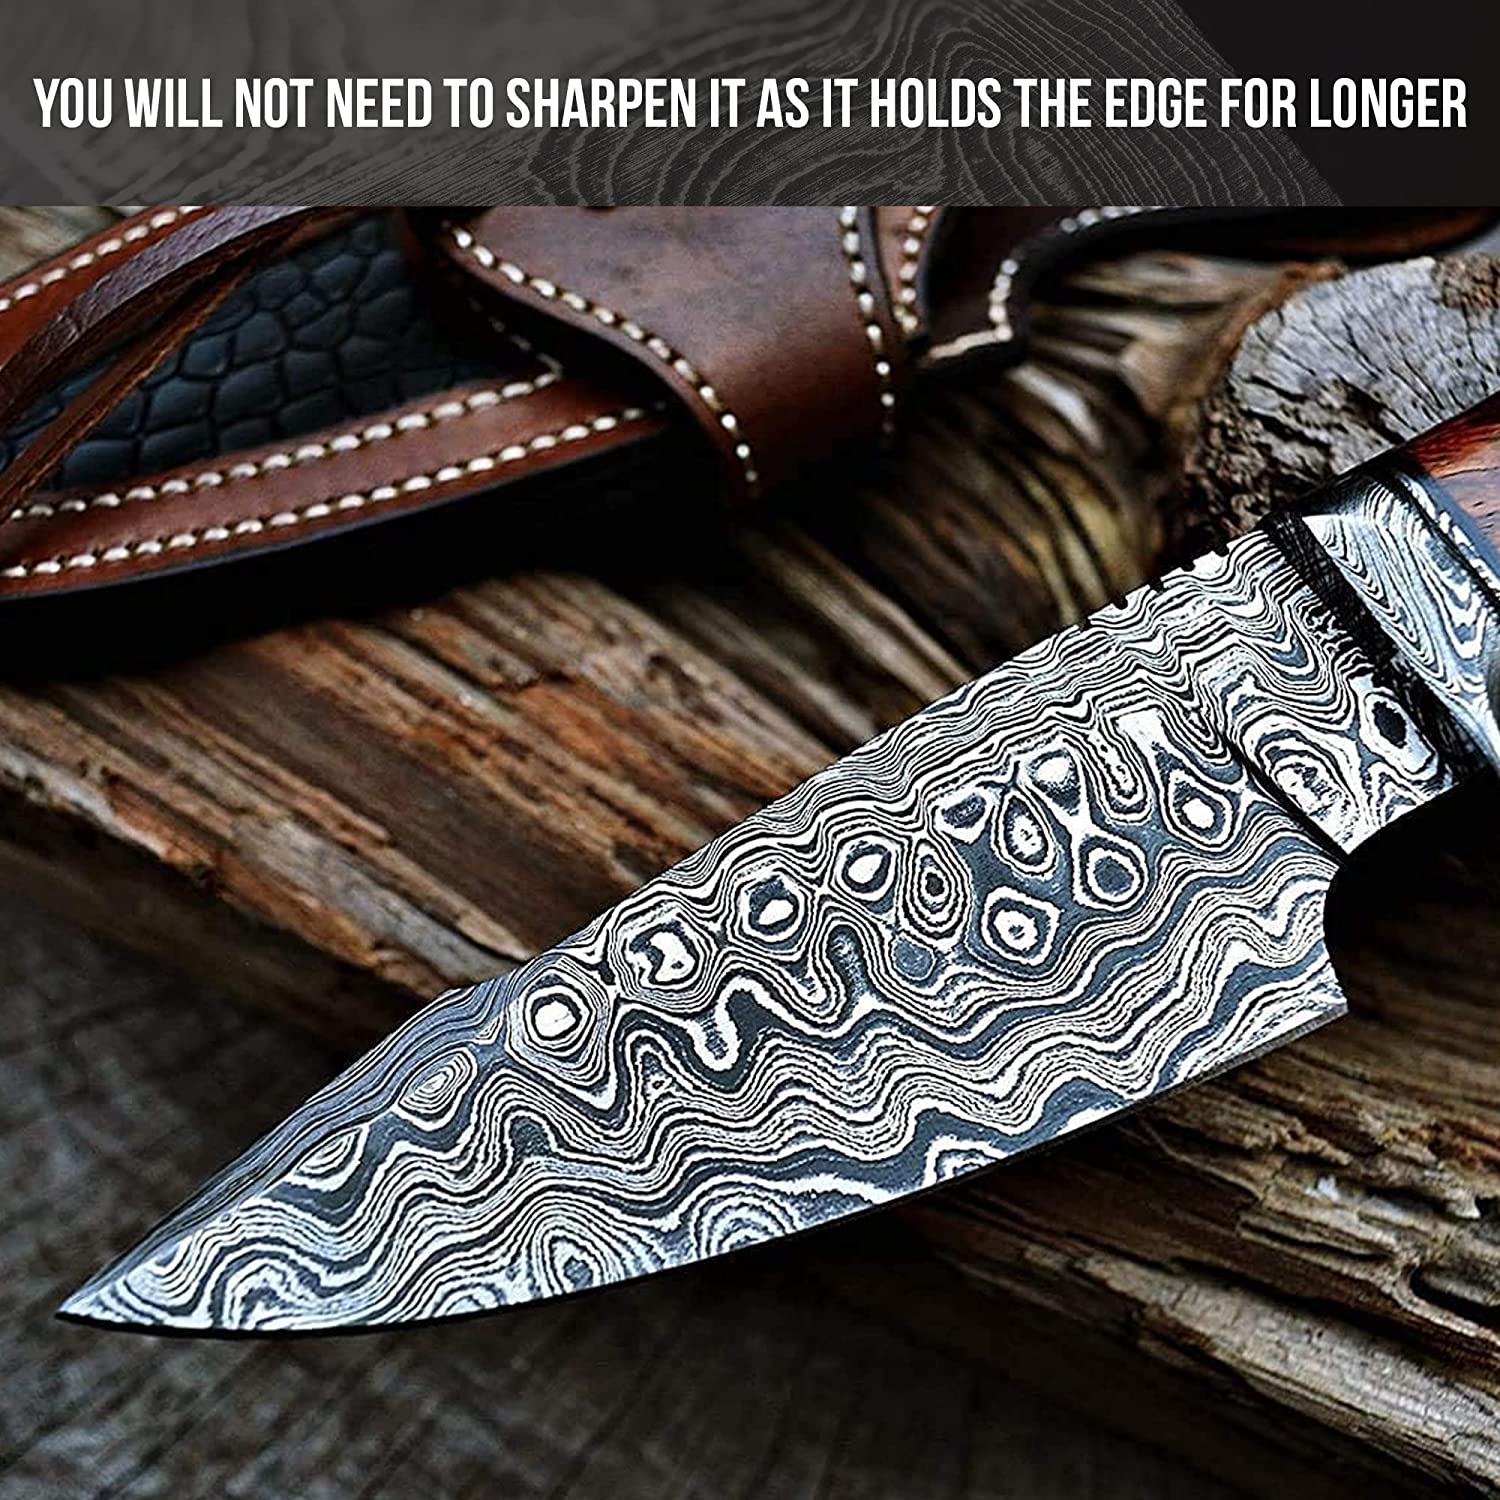 Ragnar Fixed Blade Hunting Knife